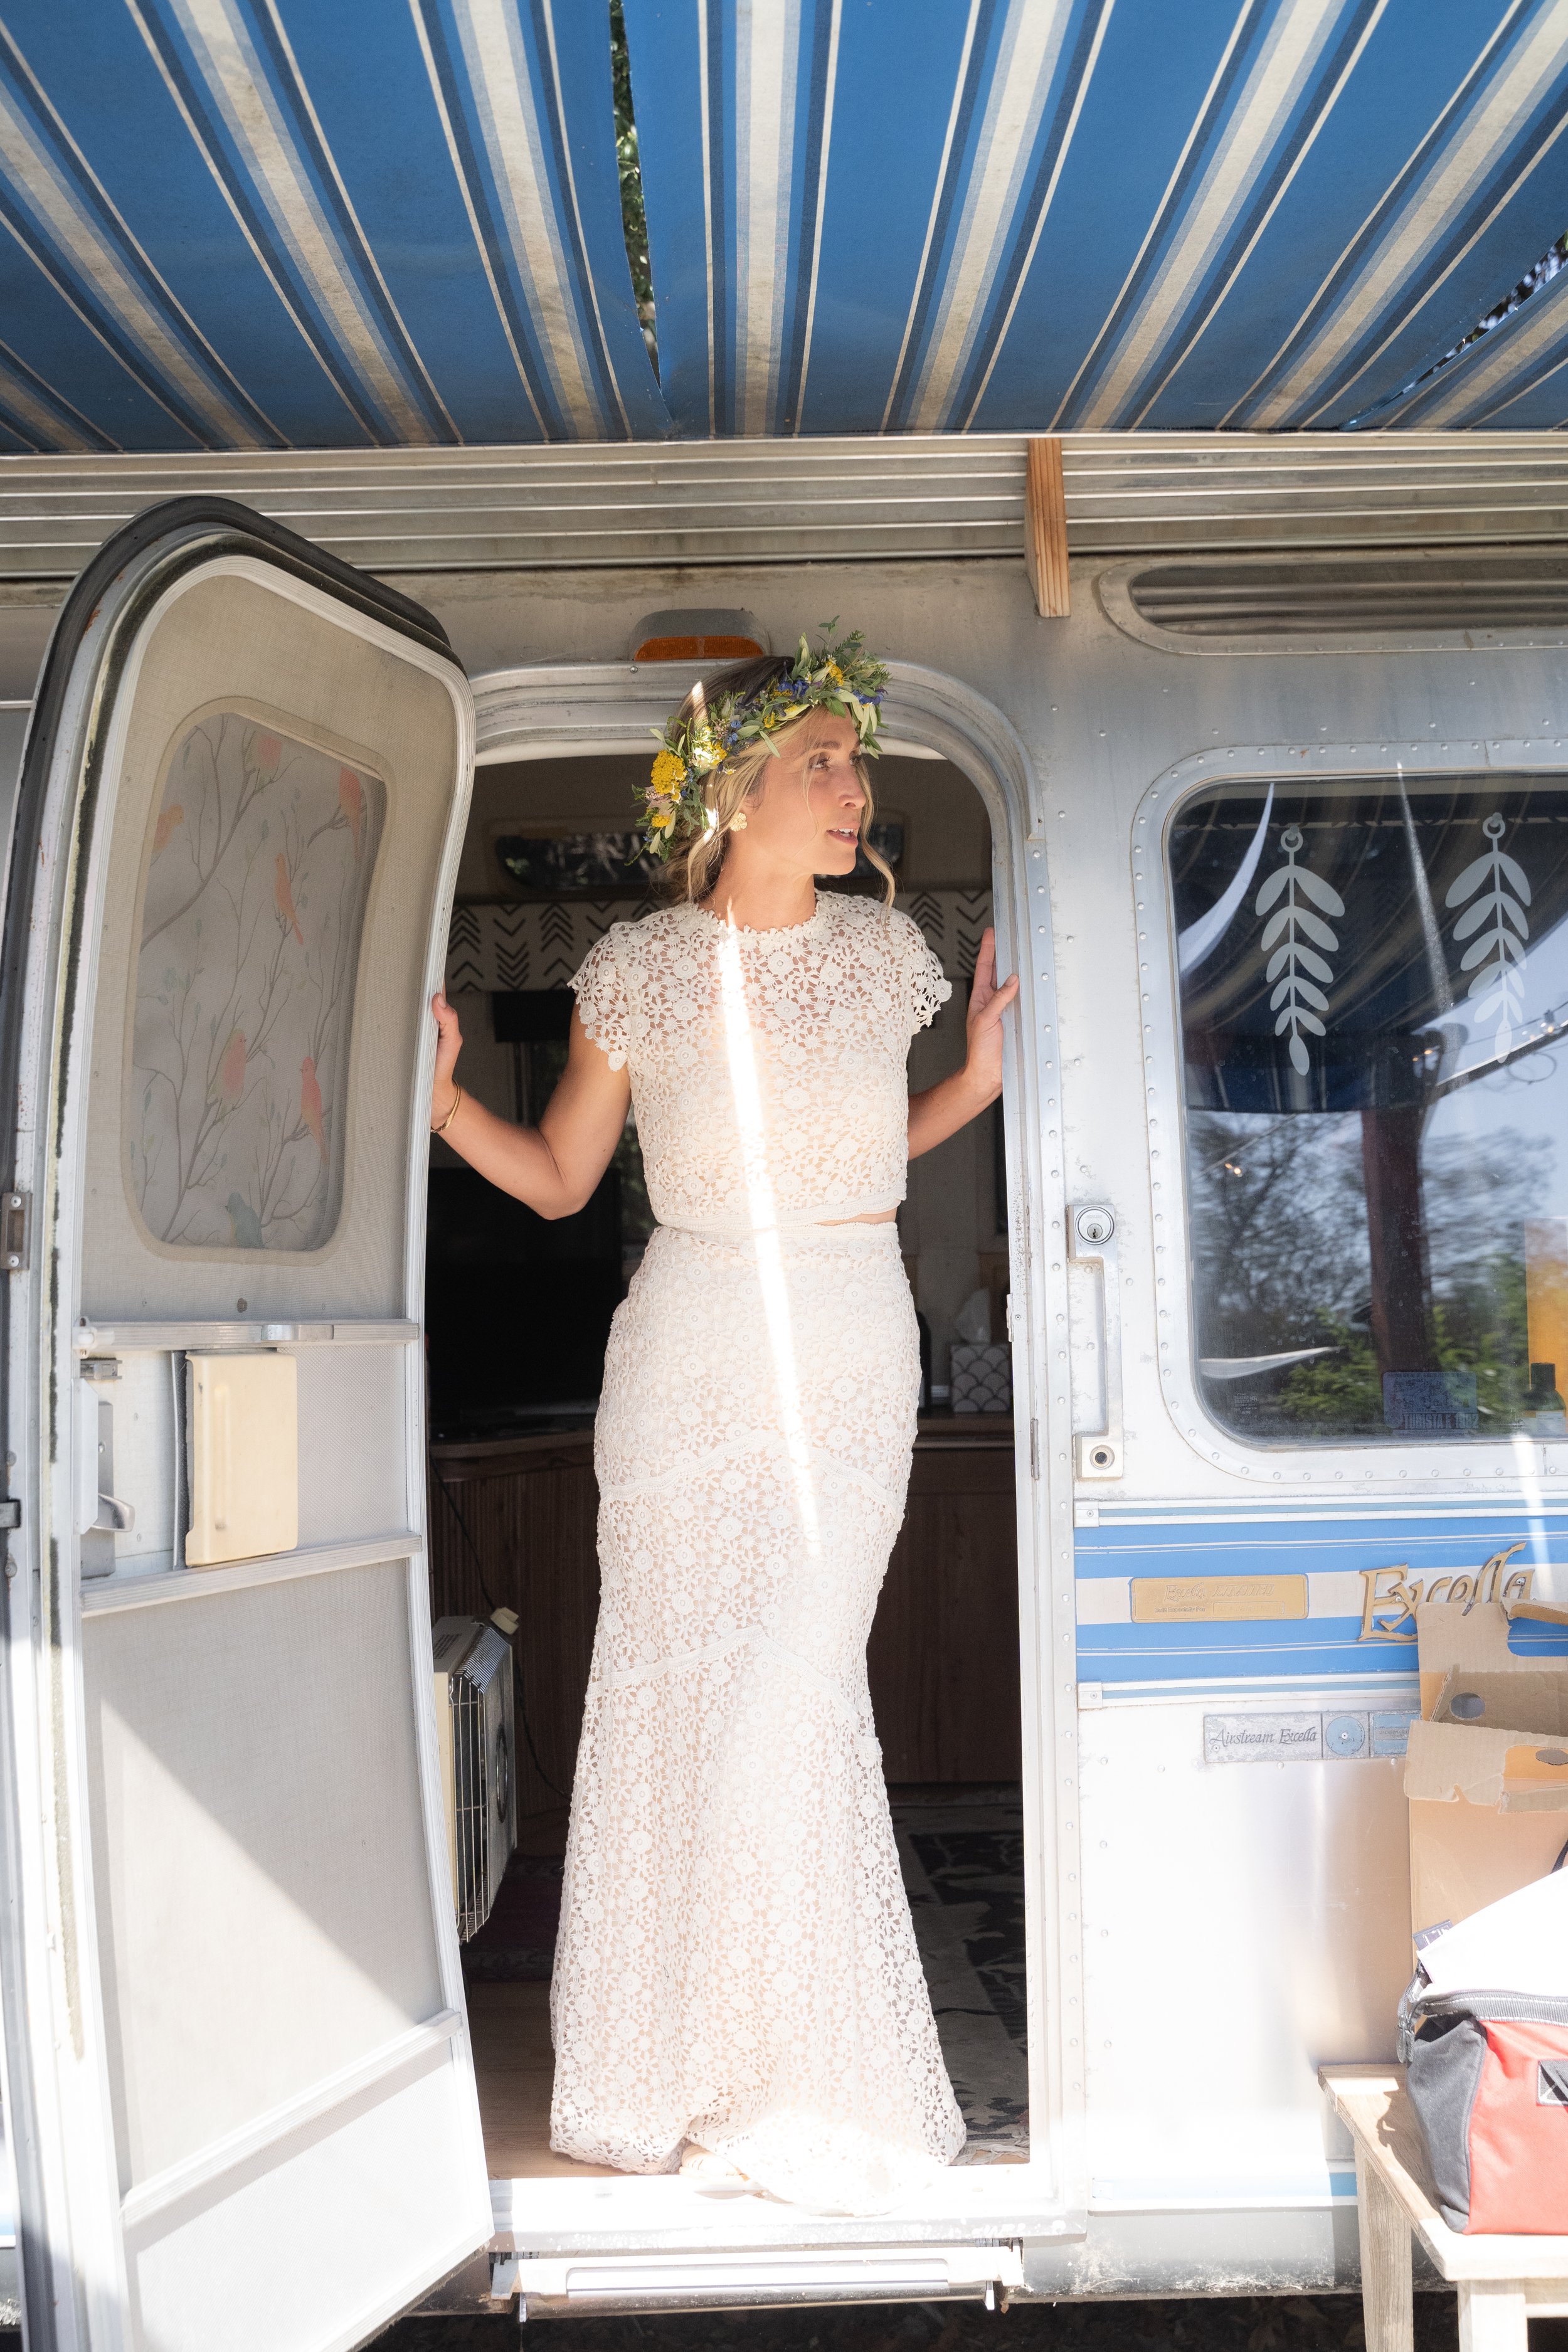 www.santabarbarawedding.com | Events by Fran | Jacob Grant Photography | Shiela Morales | Bride Standing In Trailer Before Ceremony 